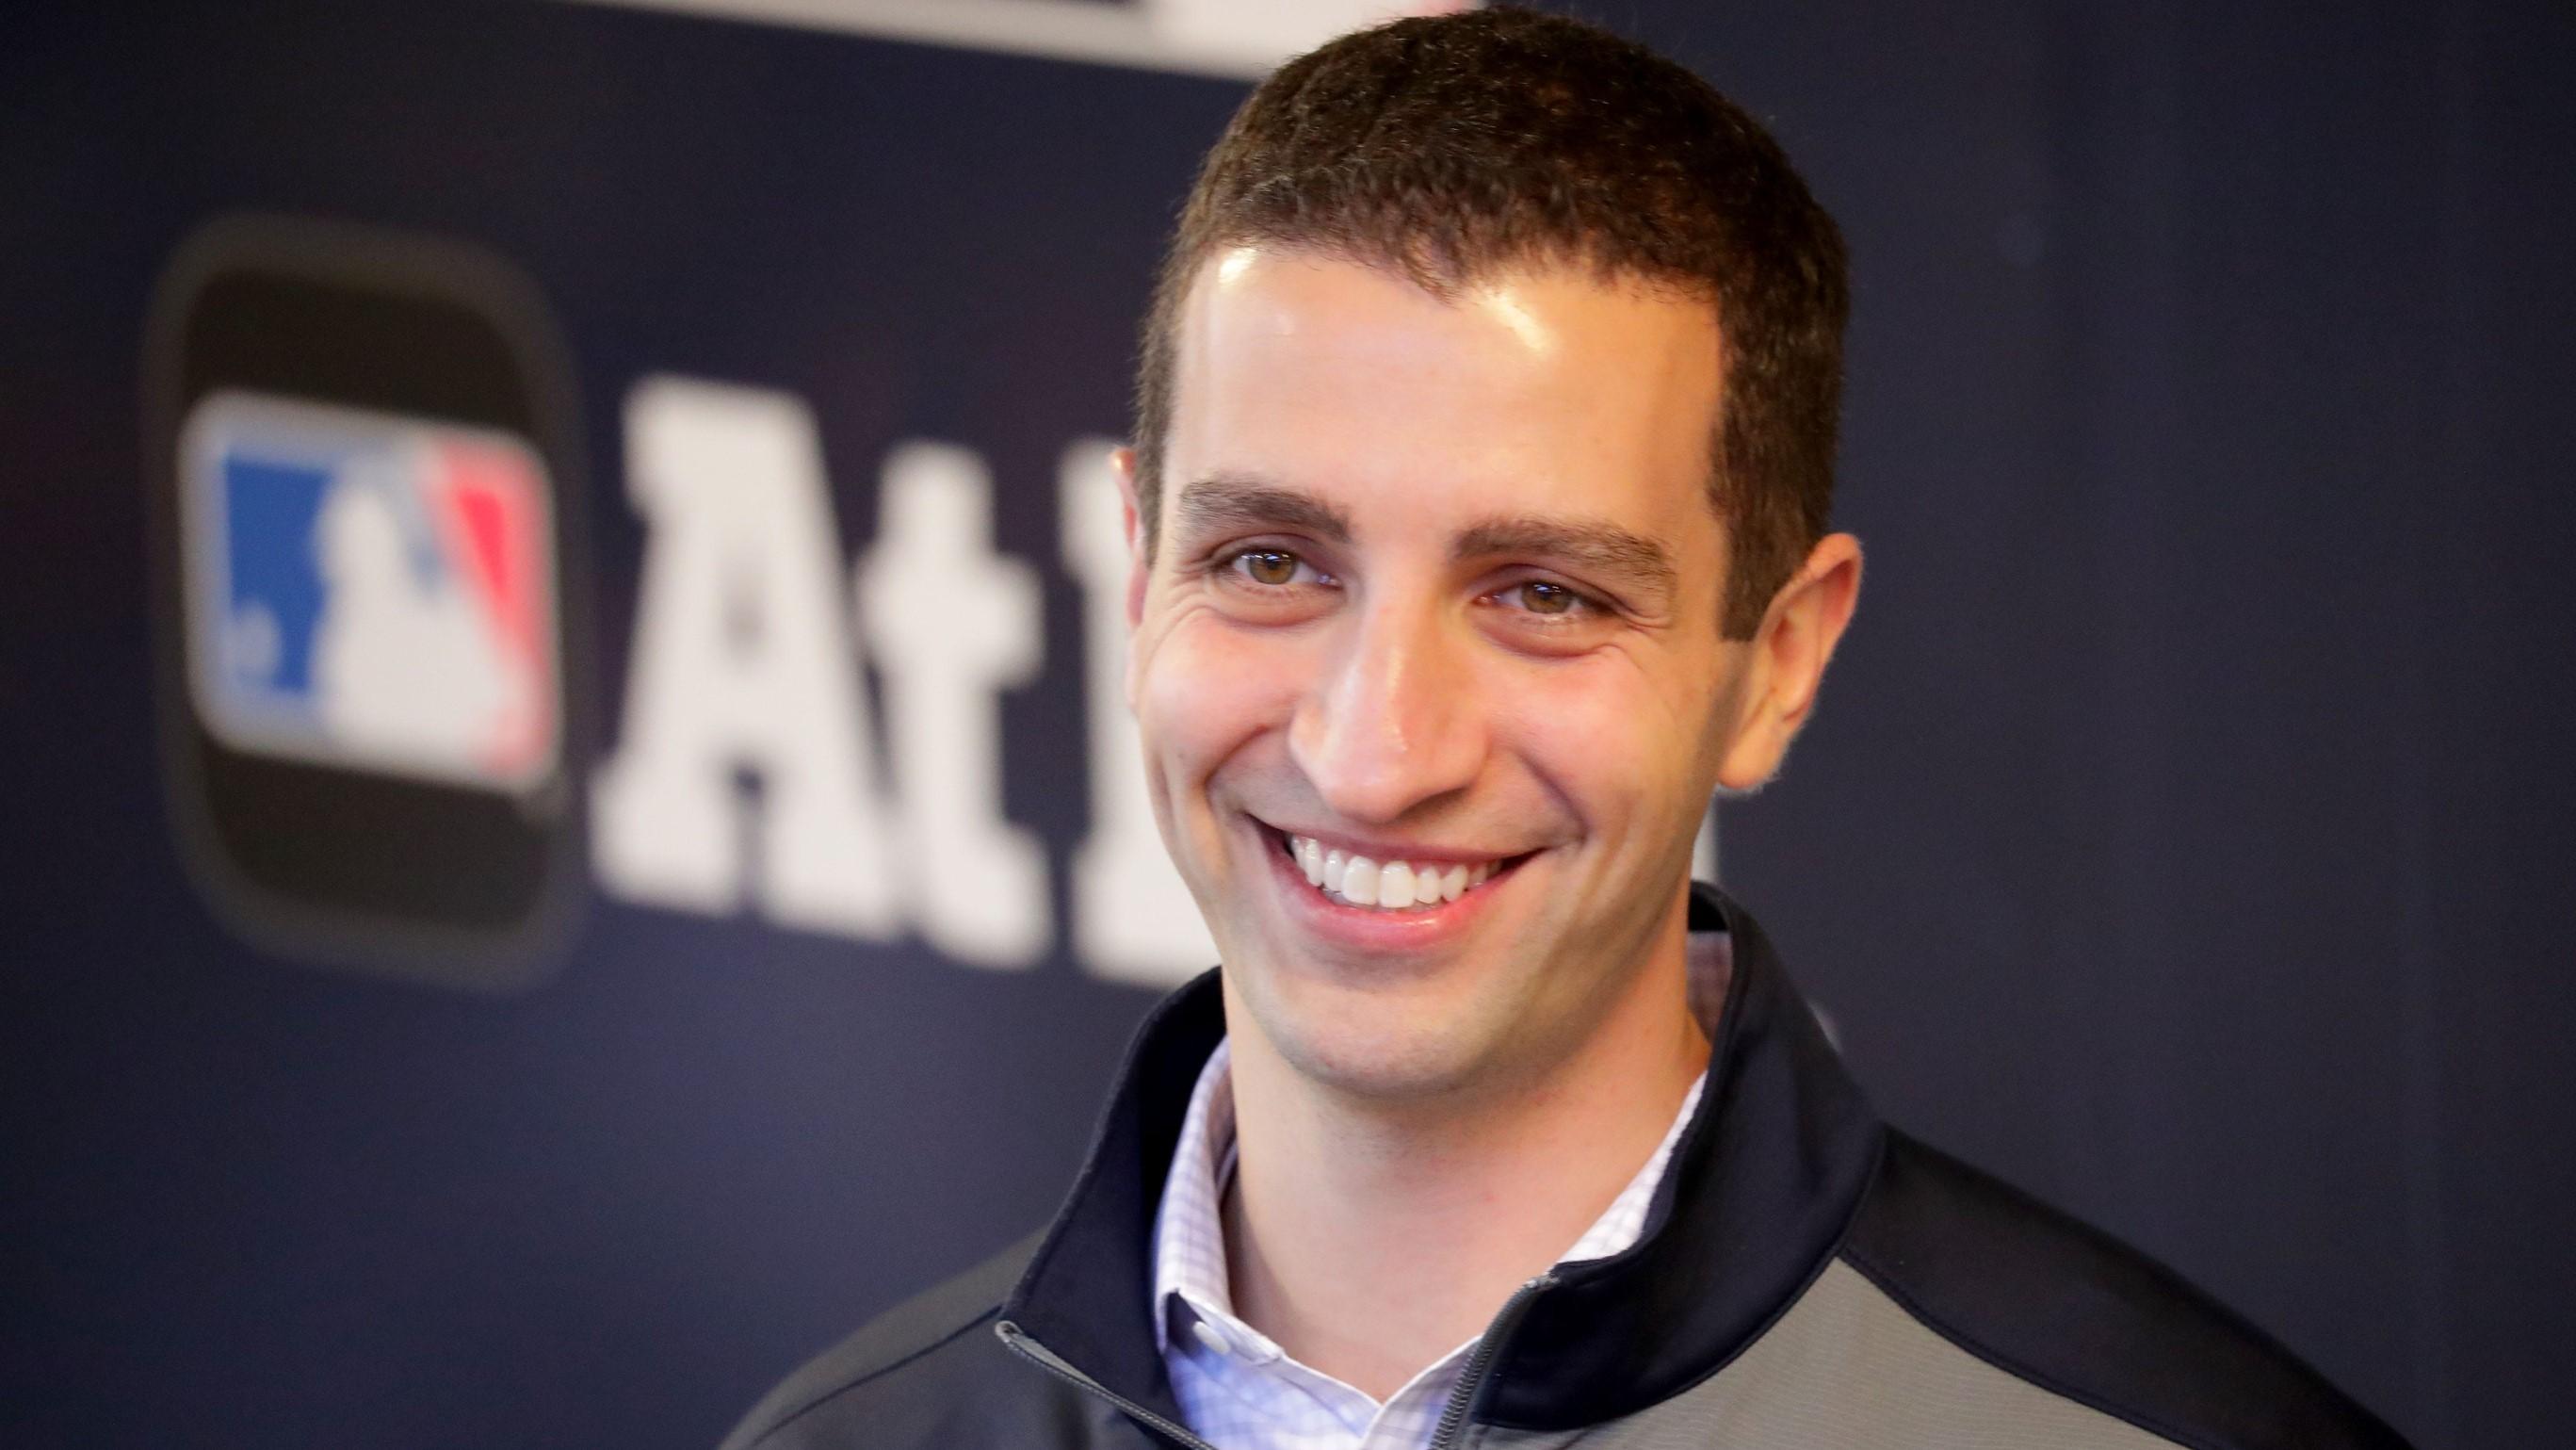 Brewers general manager David Stearns has been a busy man recently, adding nine players through trades or free-agent signings to the team's roster. / Mike De Sisti, Milwaukee Journal Sentinel